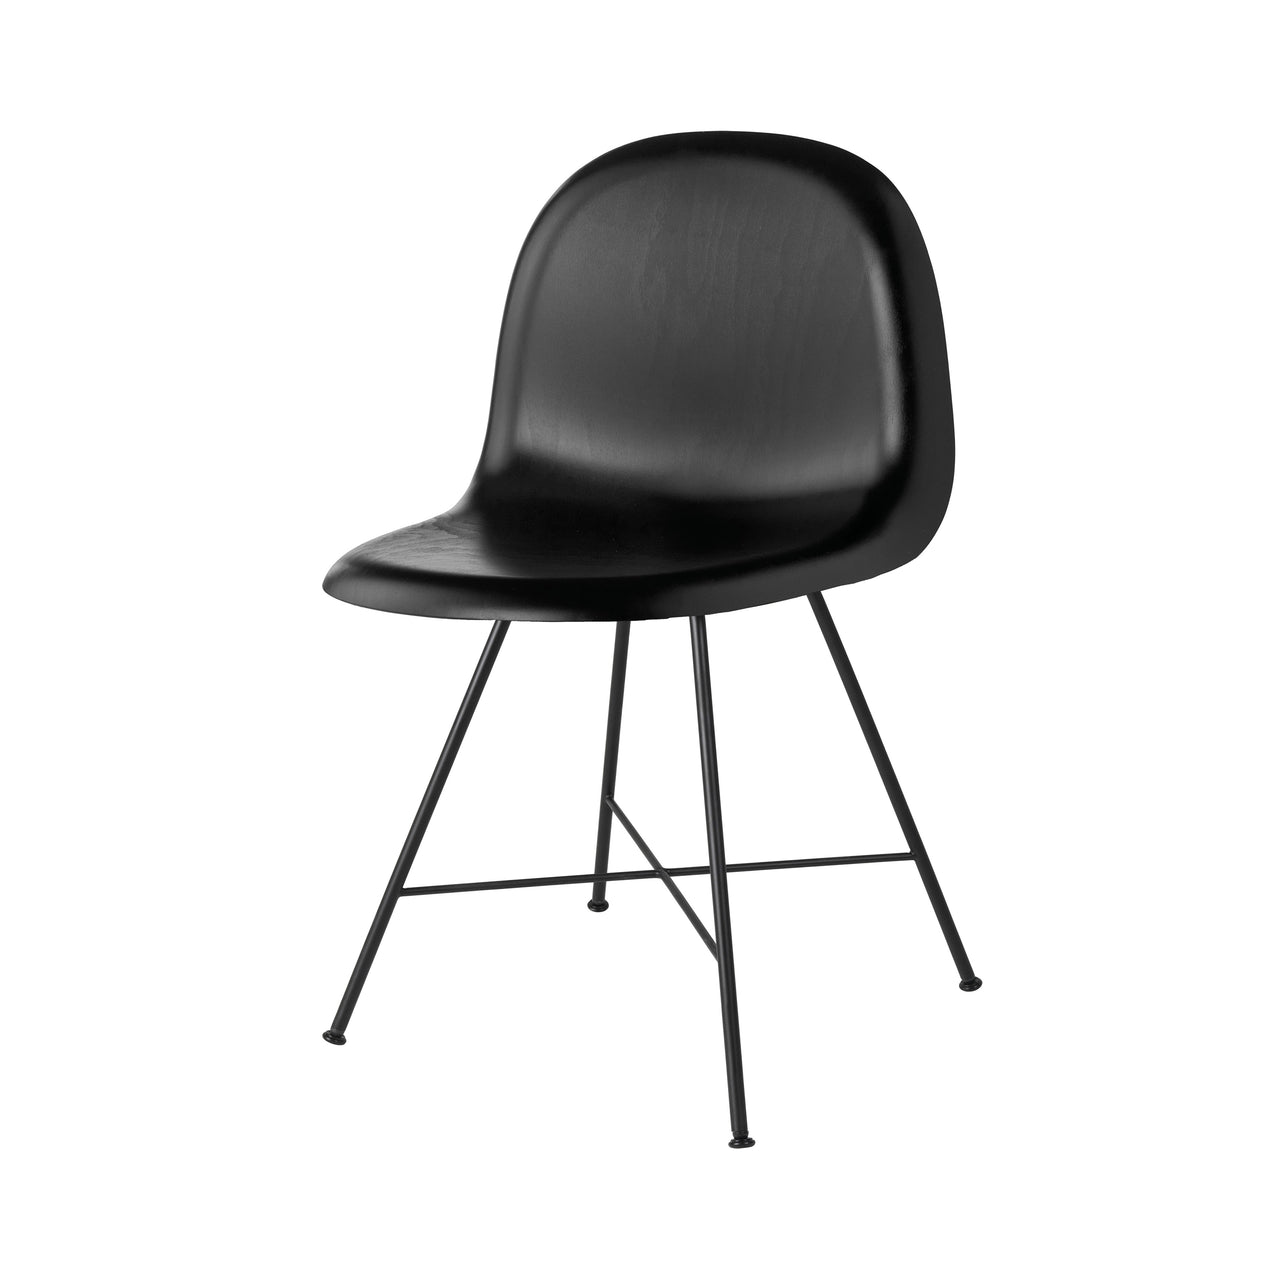 3D Dining Chair: Center Base + Black Stained Beech + Felt Glides